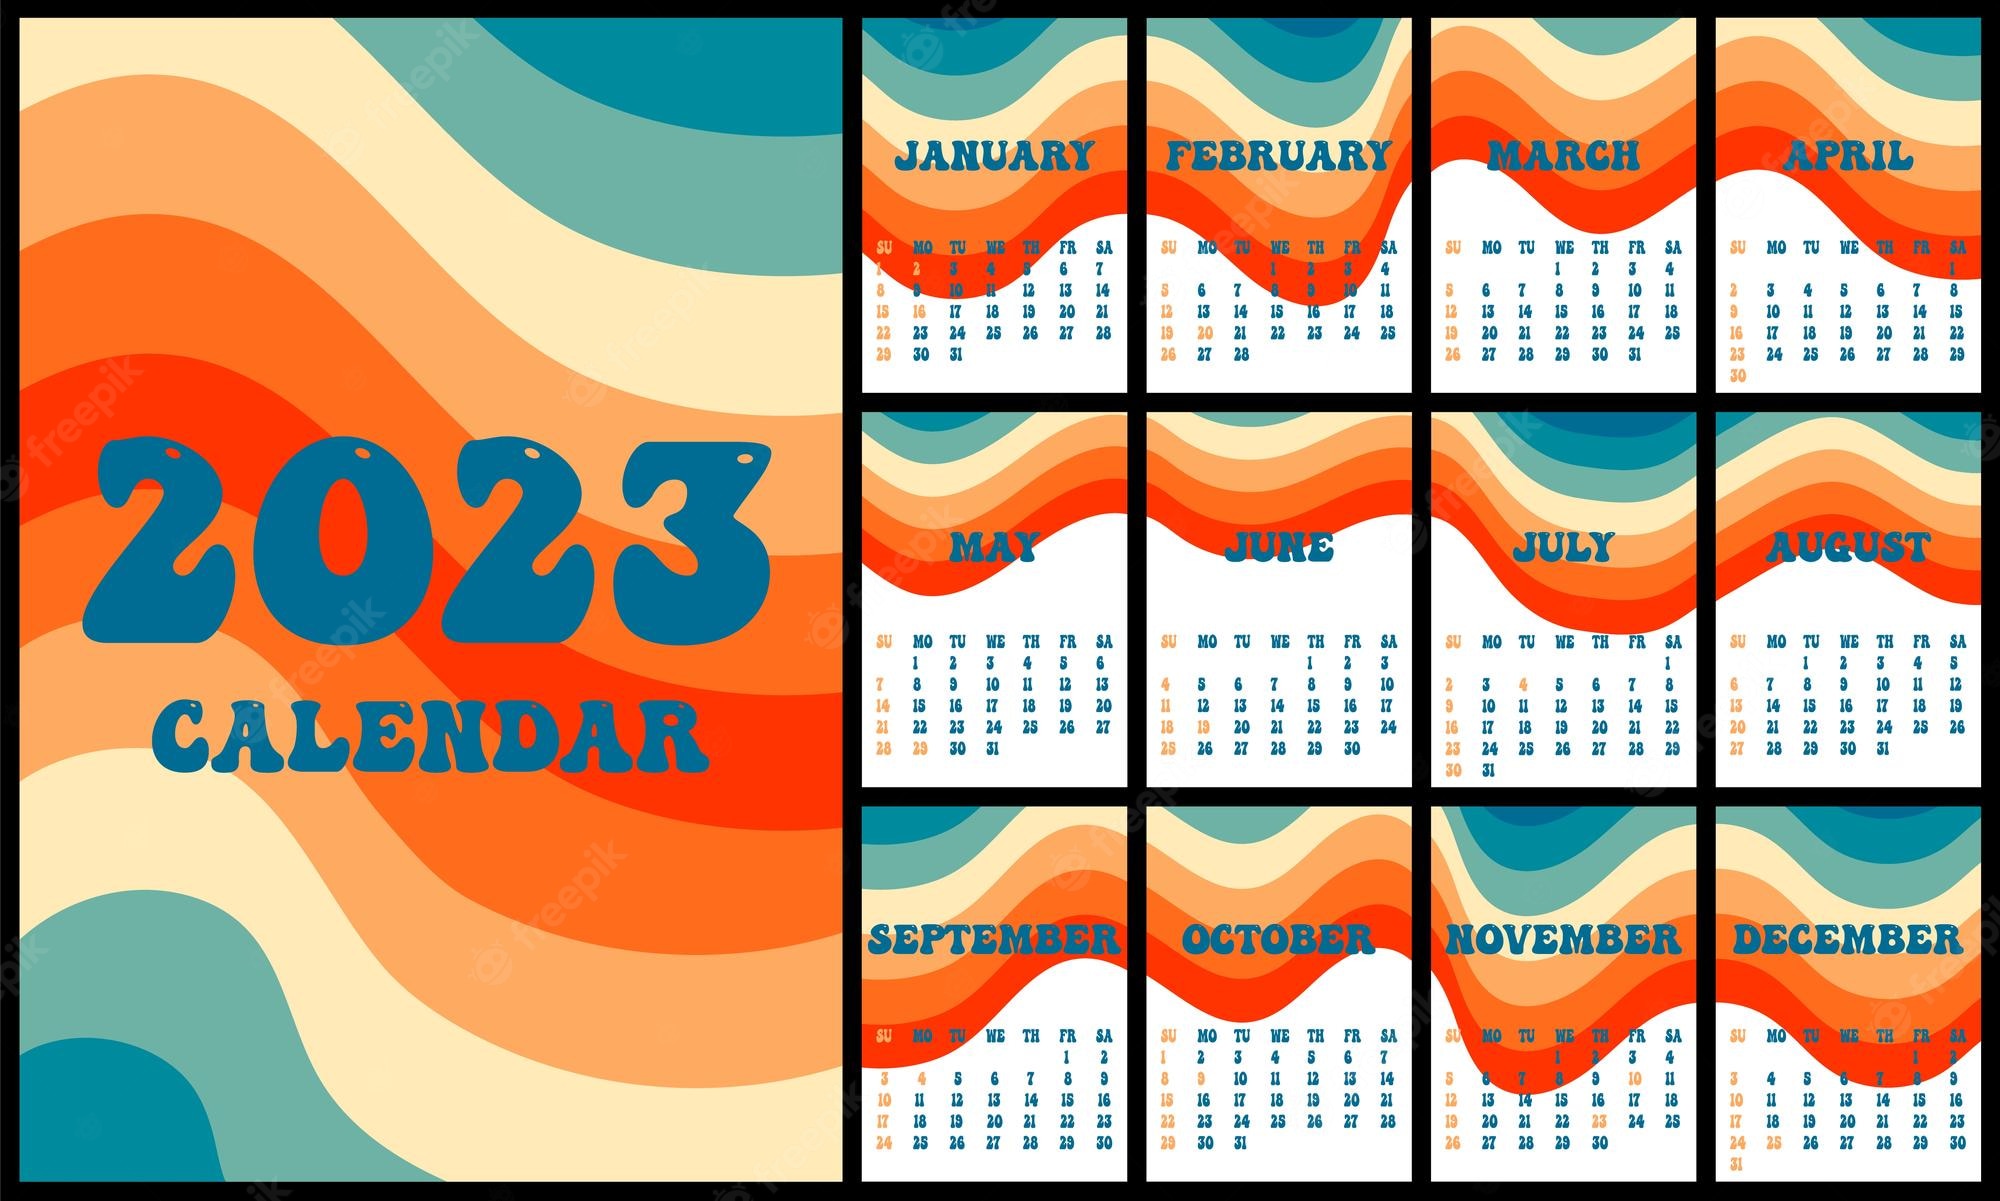 Premium Vector. Calendar 2023 retro groovy wallpaper vertical covers and 12 month pages week start on sunday a4 a3 a2 a5 minimalistic design